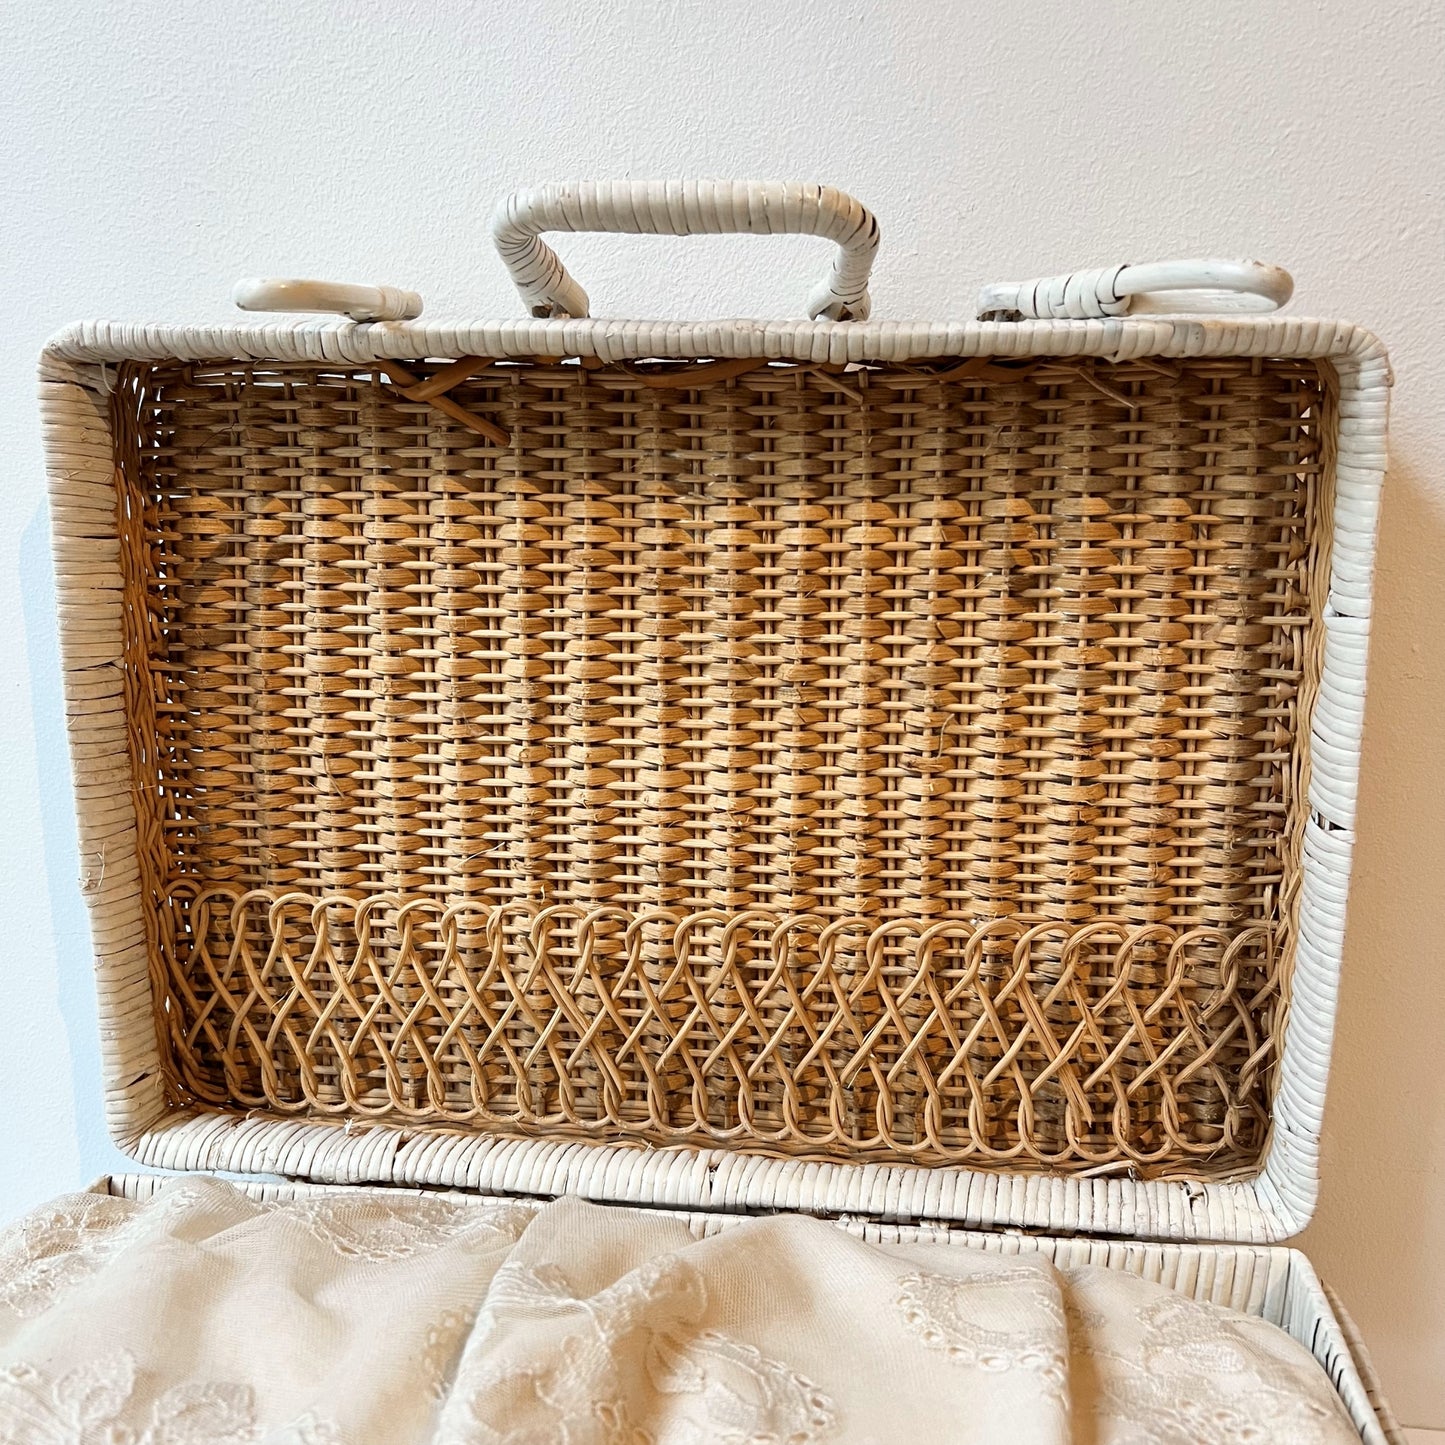 【Vintage】Germany - 1960s Picnic Basket with Cushion